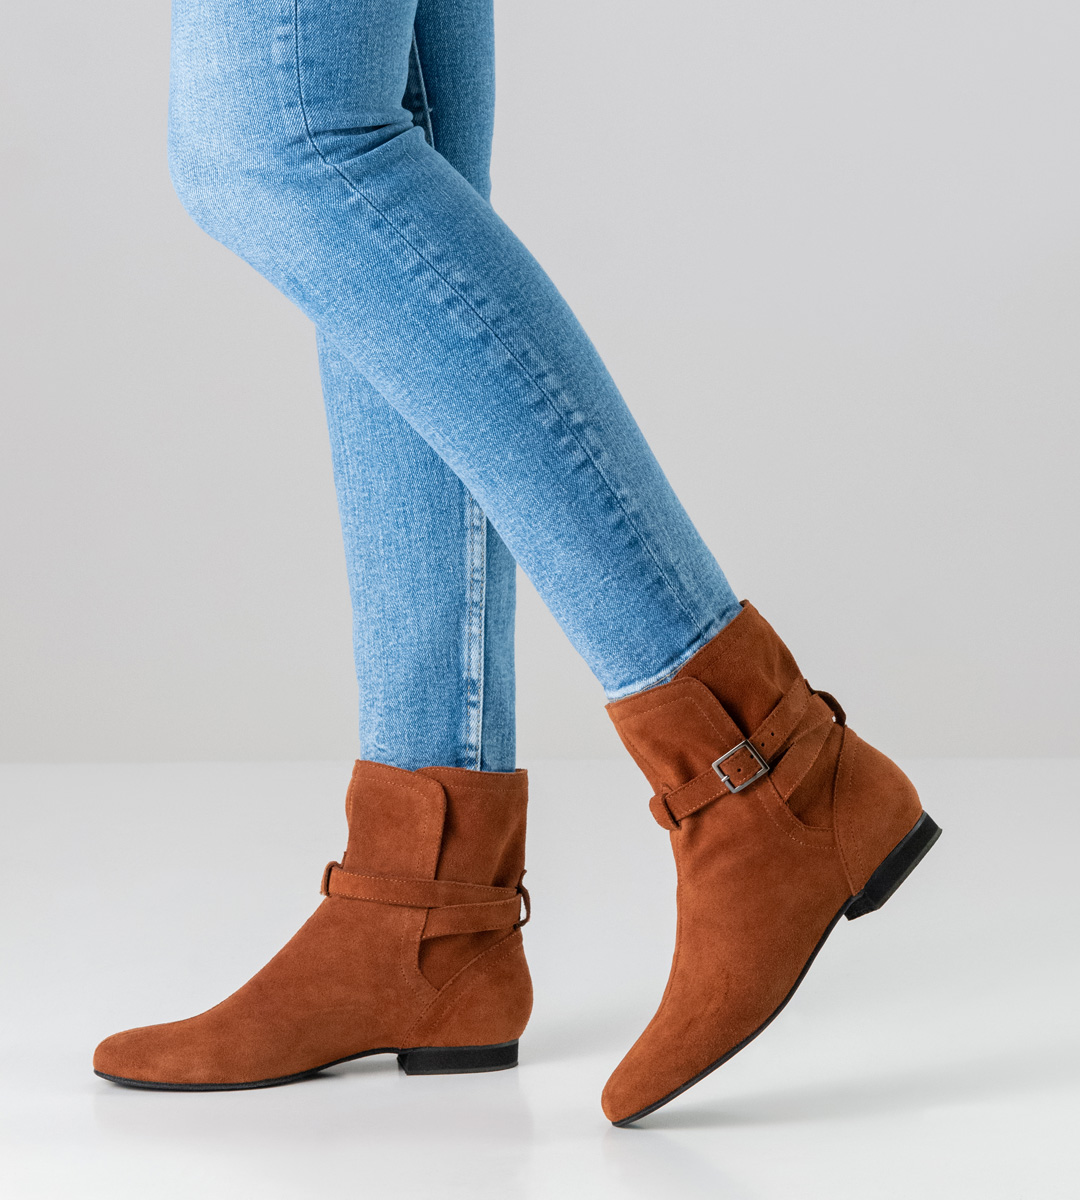 Linedance dance boots from Werner Kern in brown velour